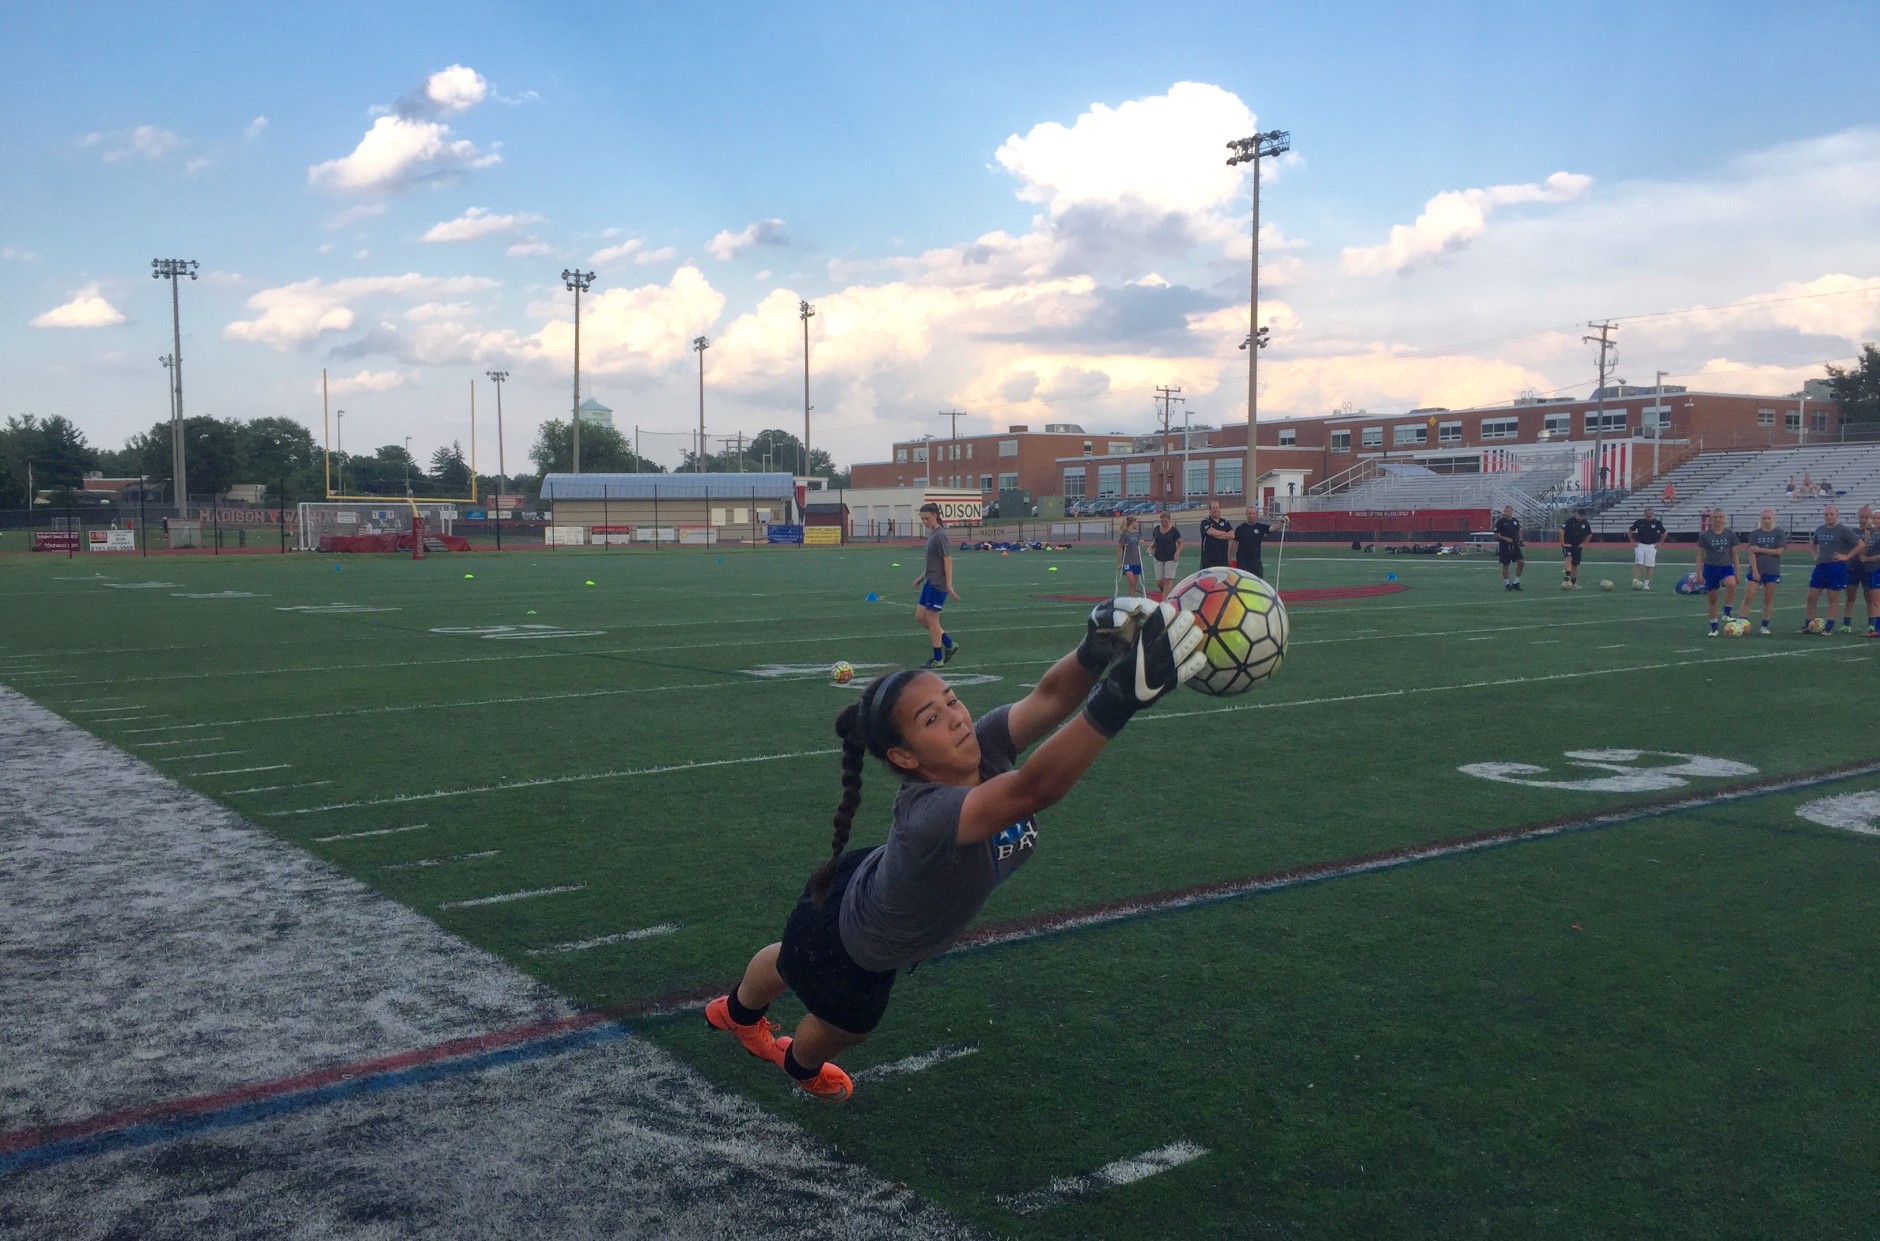 "You have to work hard and be in good shape," said Goalkeeper Riley Melendez of Annandale about how to qualify to be on the team. (WTOP/Kristi King)